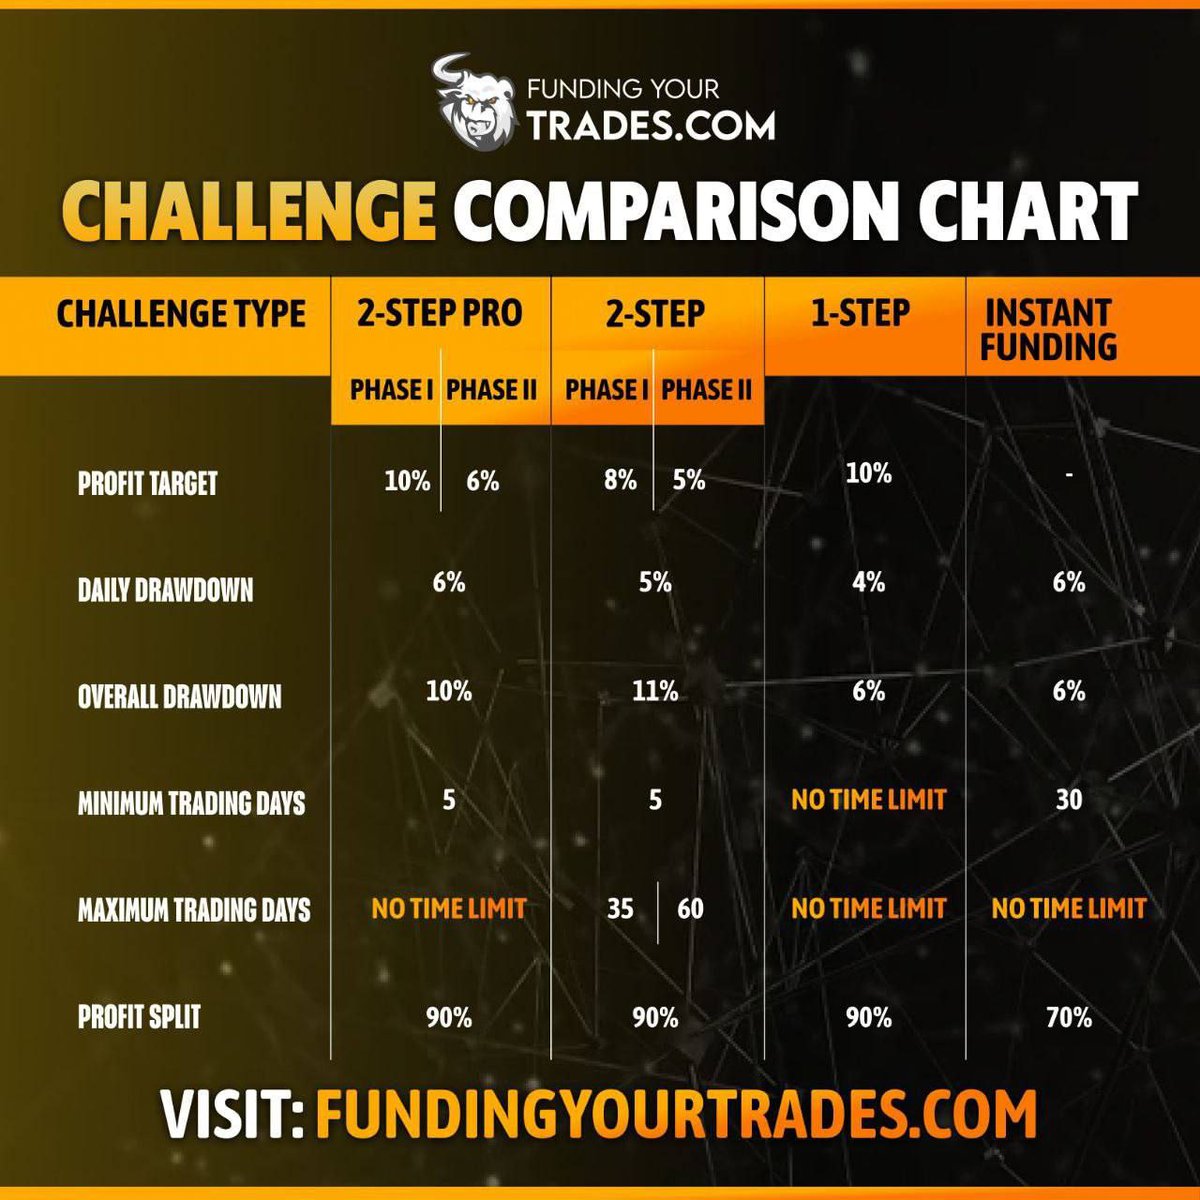 🚀 Unlock Your Trading Potential with FYT Funded Trader Programs! 🚀 🎯 Diverse Challenge Models: ✅ 2 Step Challenge ✅ 1 Step Challenge ✅ Instant Funding Get 25% OFF + BOGO DEAL + 100% Refundable Fee + 5% Profit from your challenge! Join FYT today: FundingYourTrades.Com